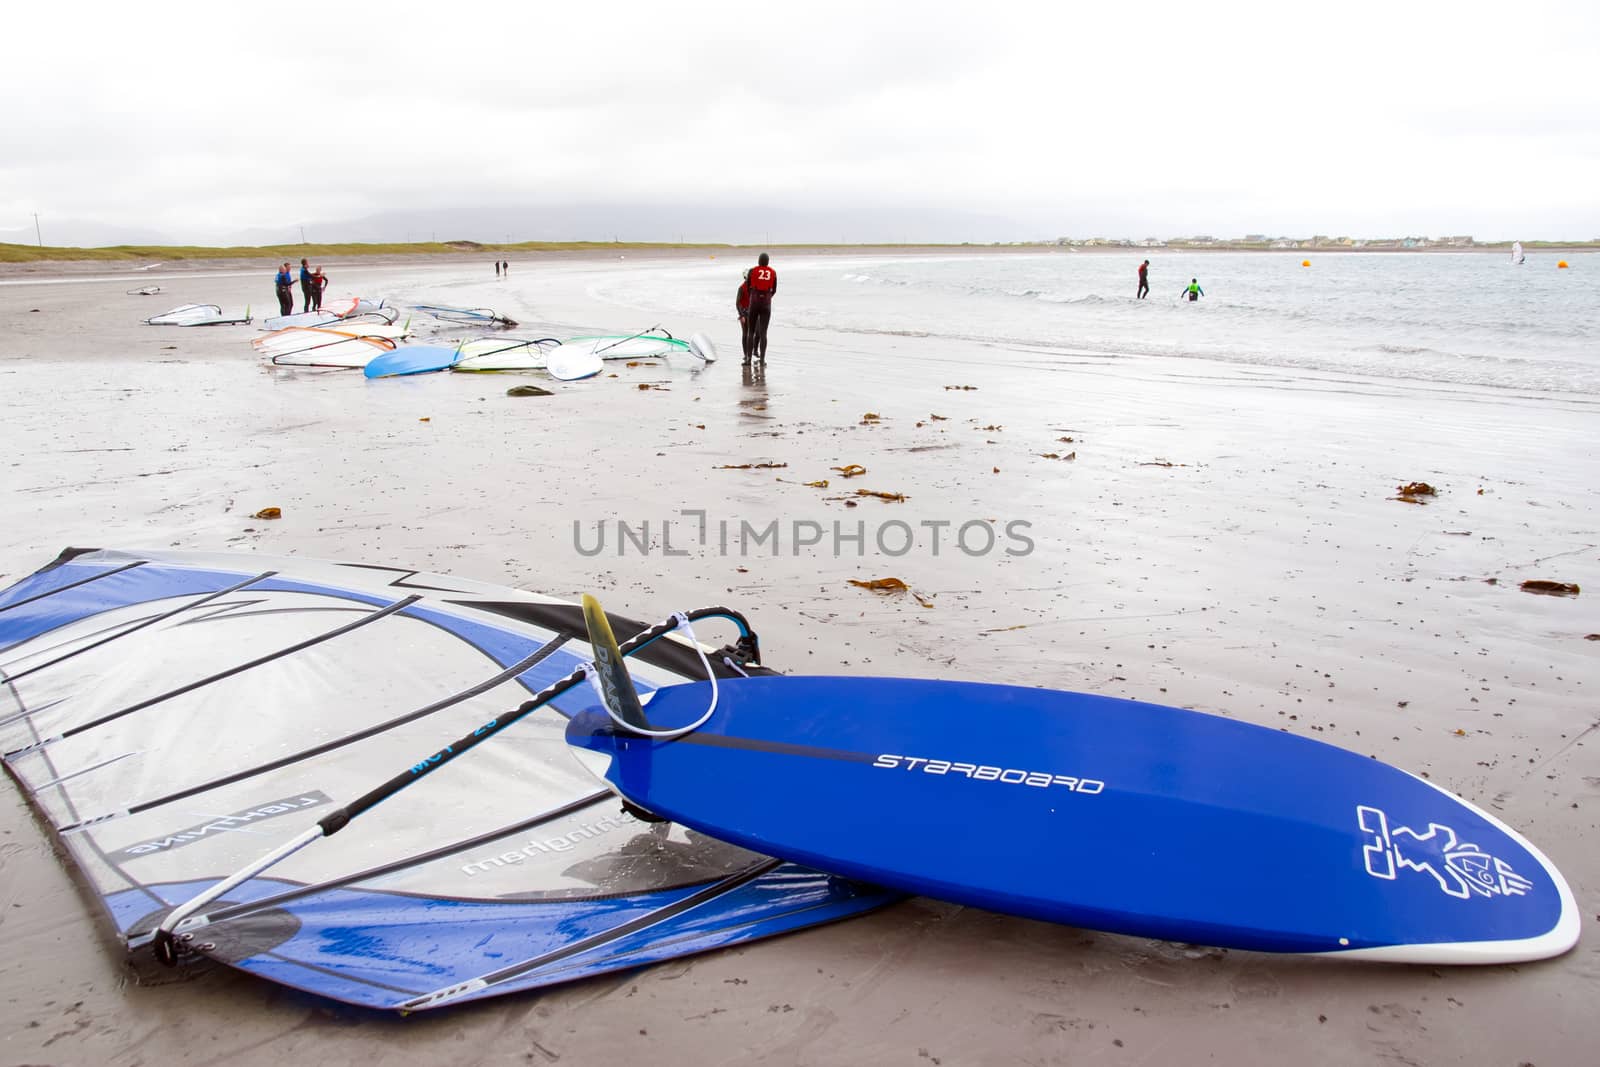 windsurfing champion getting ready to race and surf on the beach in the maharees county kerry ireland